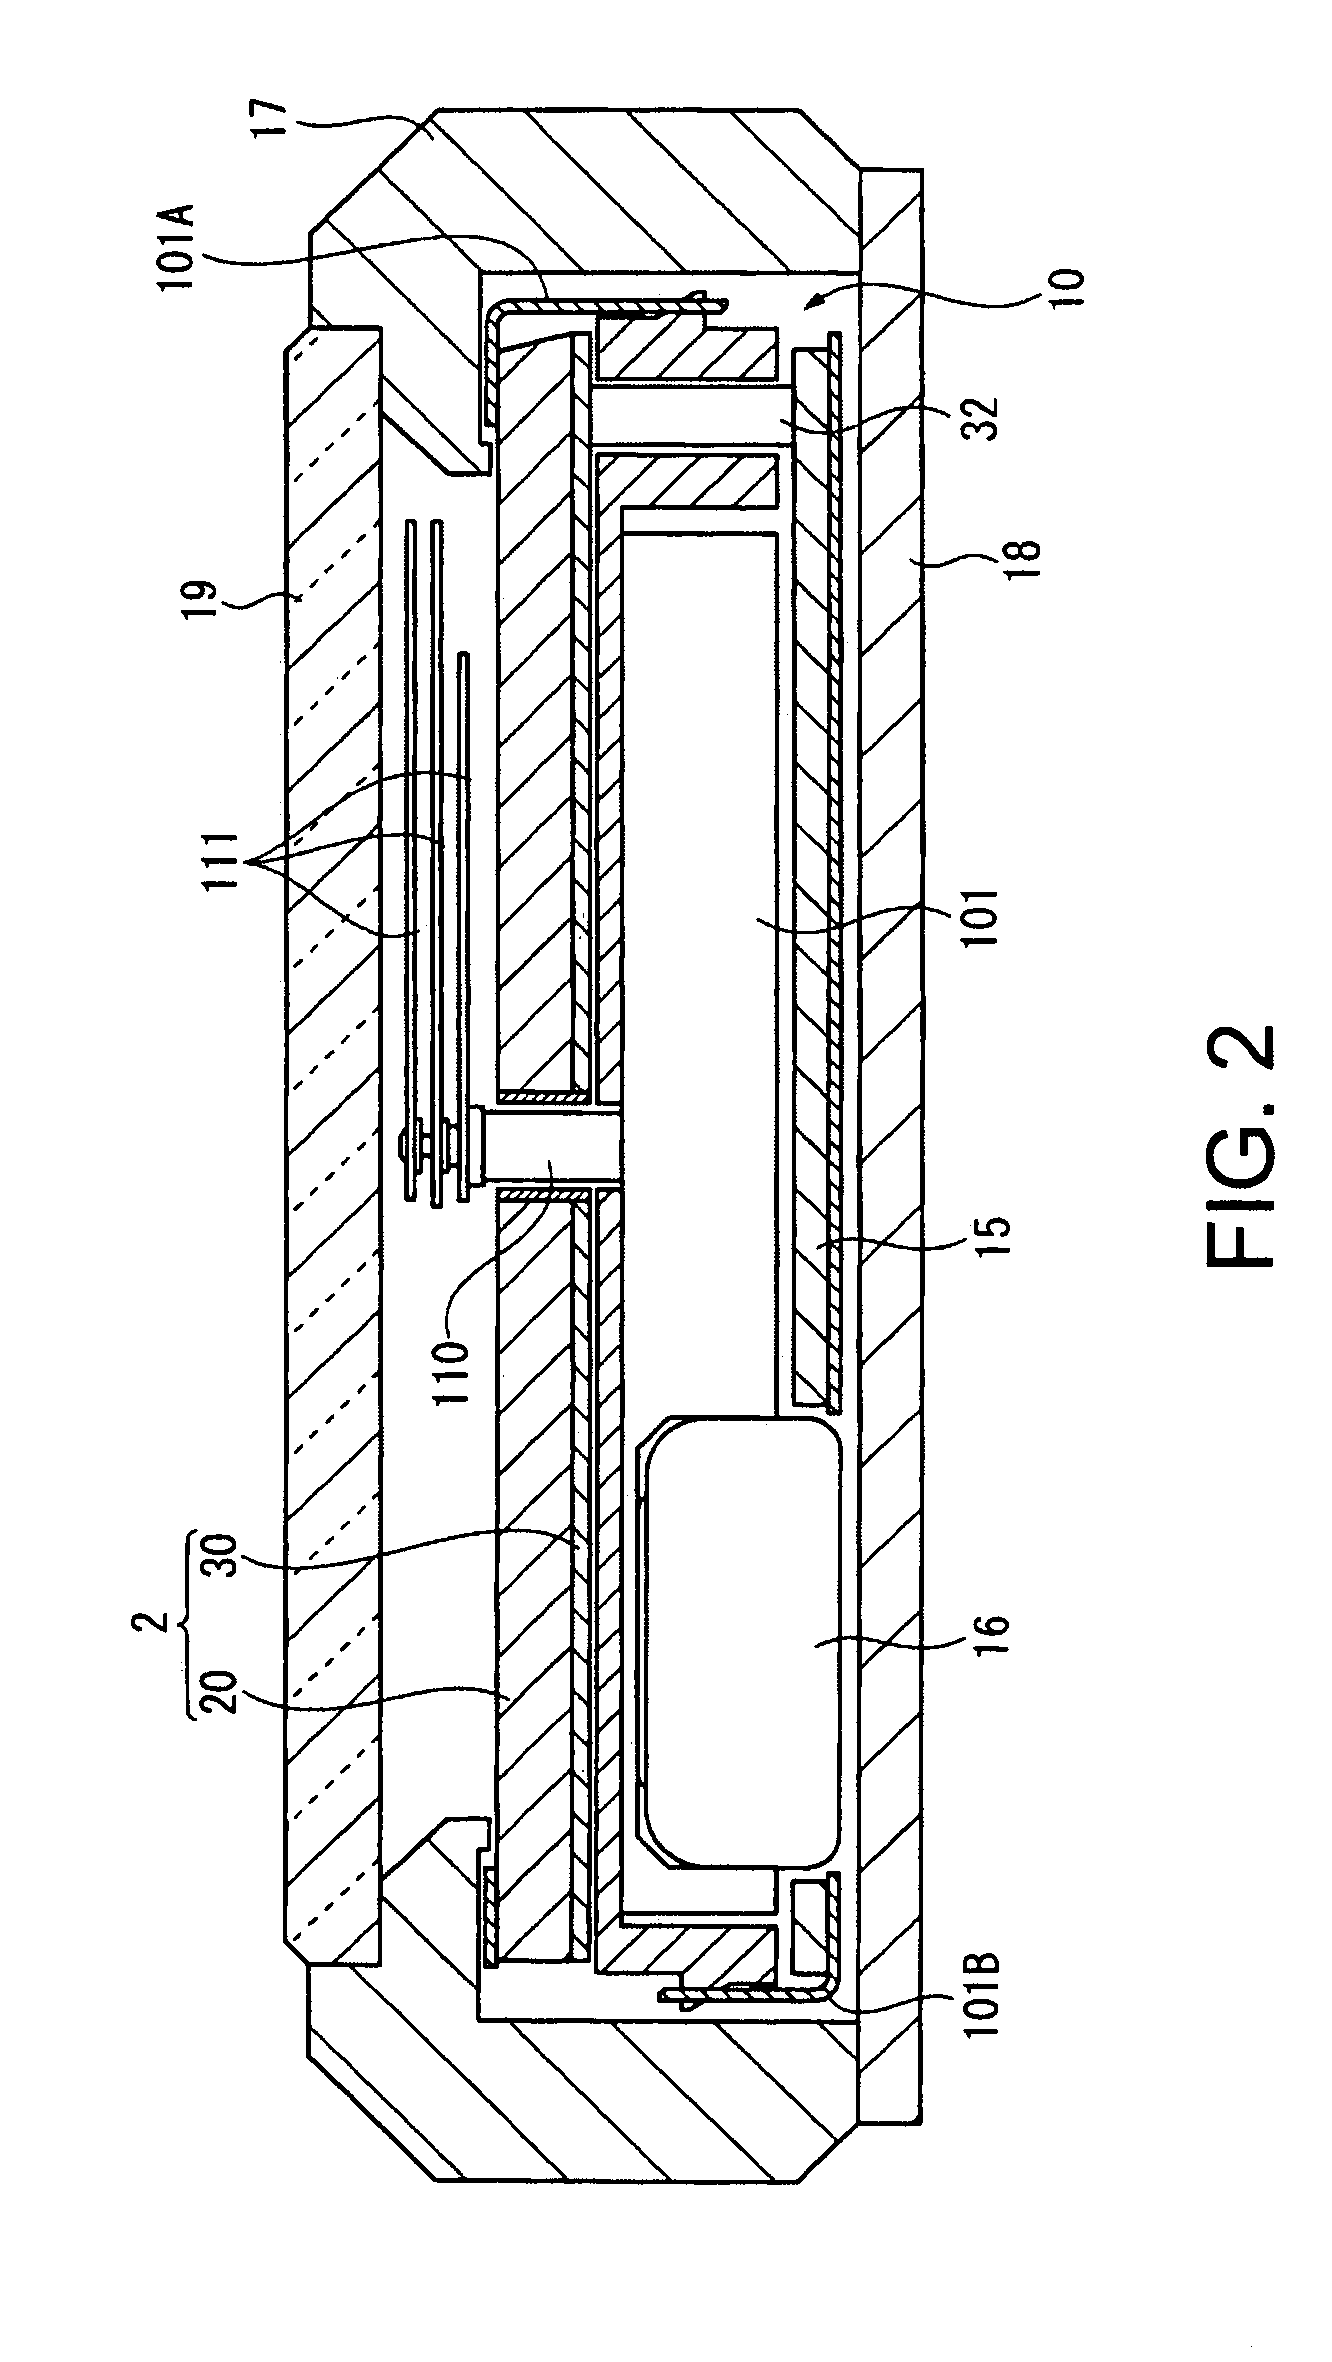 Display device and timepiece